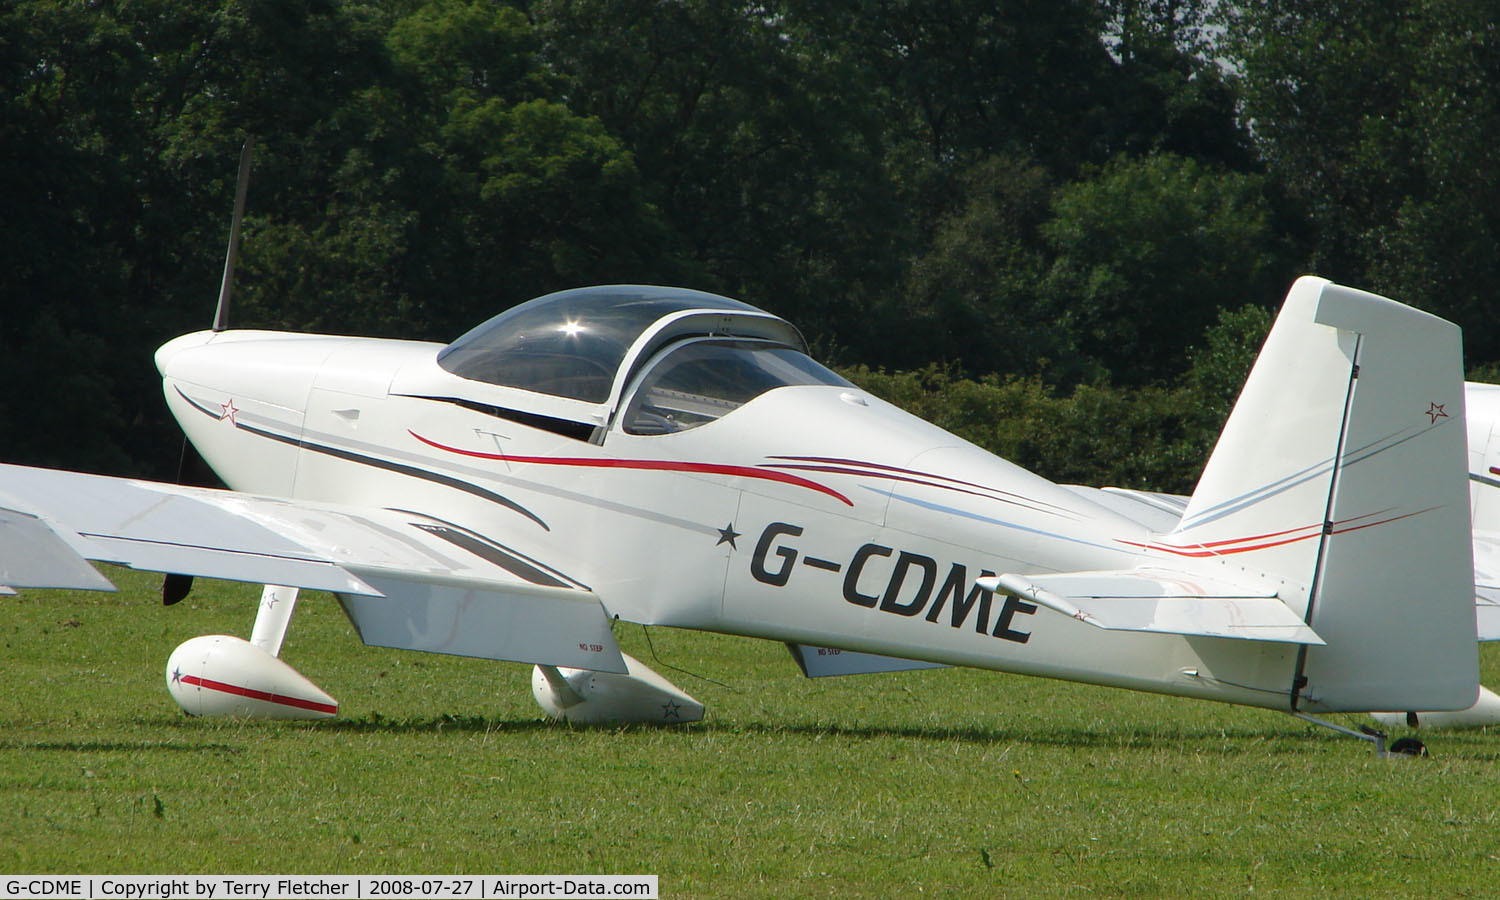 G-CDME, 2006 Vans RV-7 C/N PFA 323-14151, Vans RV-7 - a visitor to Baxterley Wings and Wheels 2008 , a grass strip in rural Warwickshire in the UK